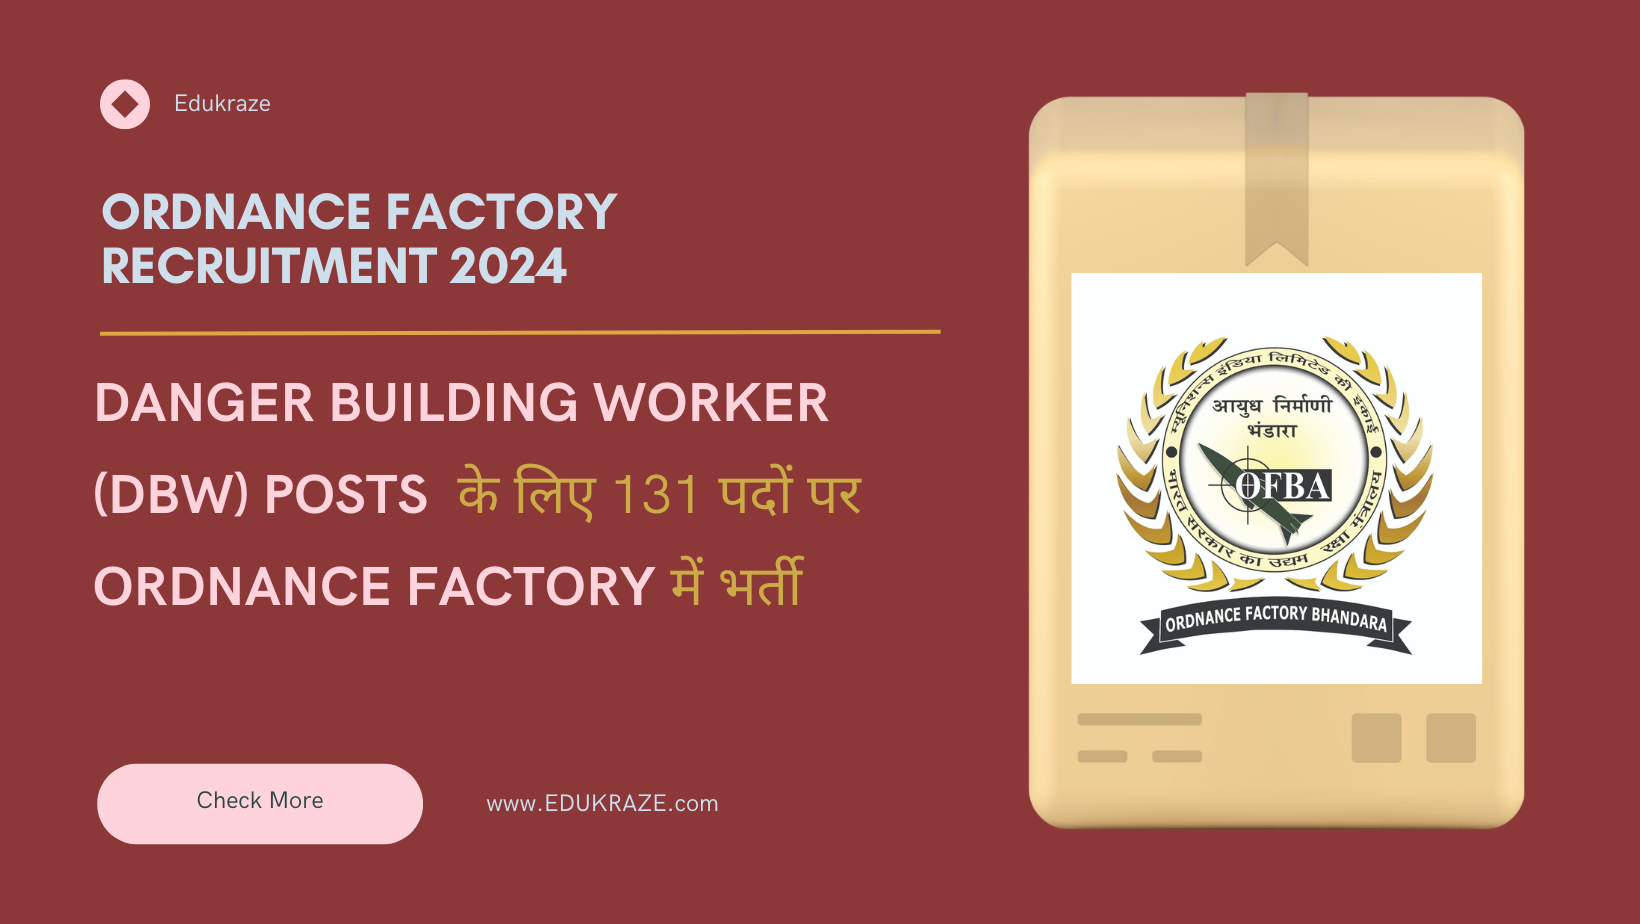 Ordnance Factory Recruitment 2024 : Check Eligibility and How to Apply